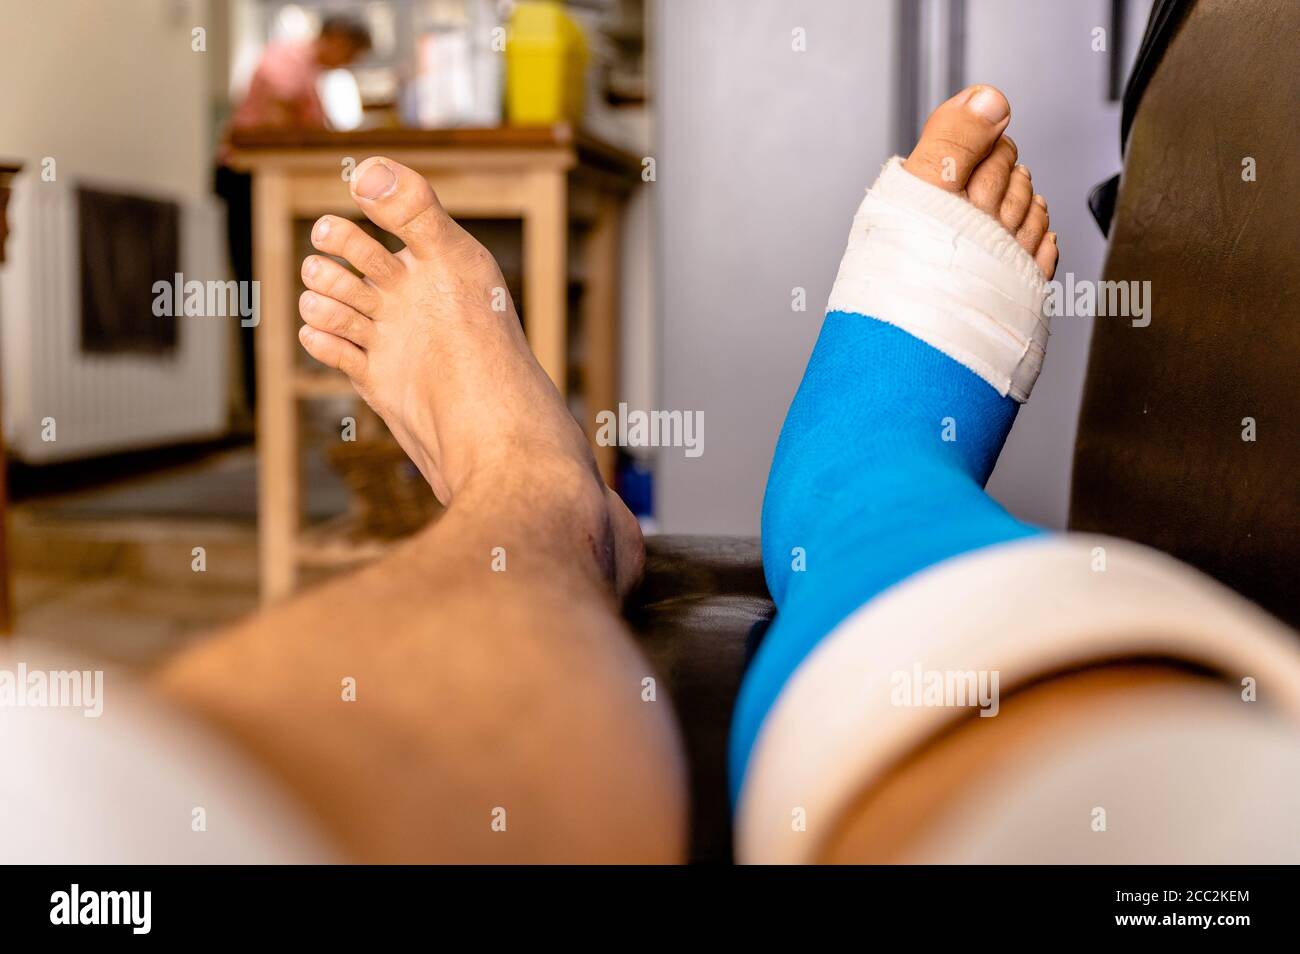 Male resting cast on chair elevated from foot surgery Stock Photo